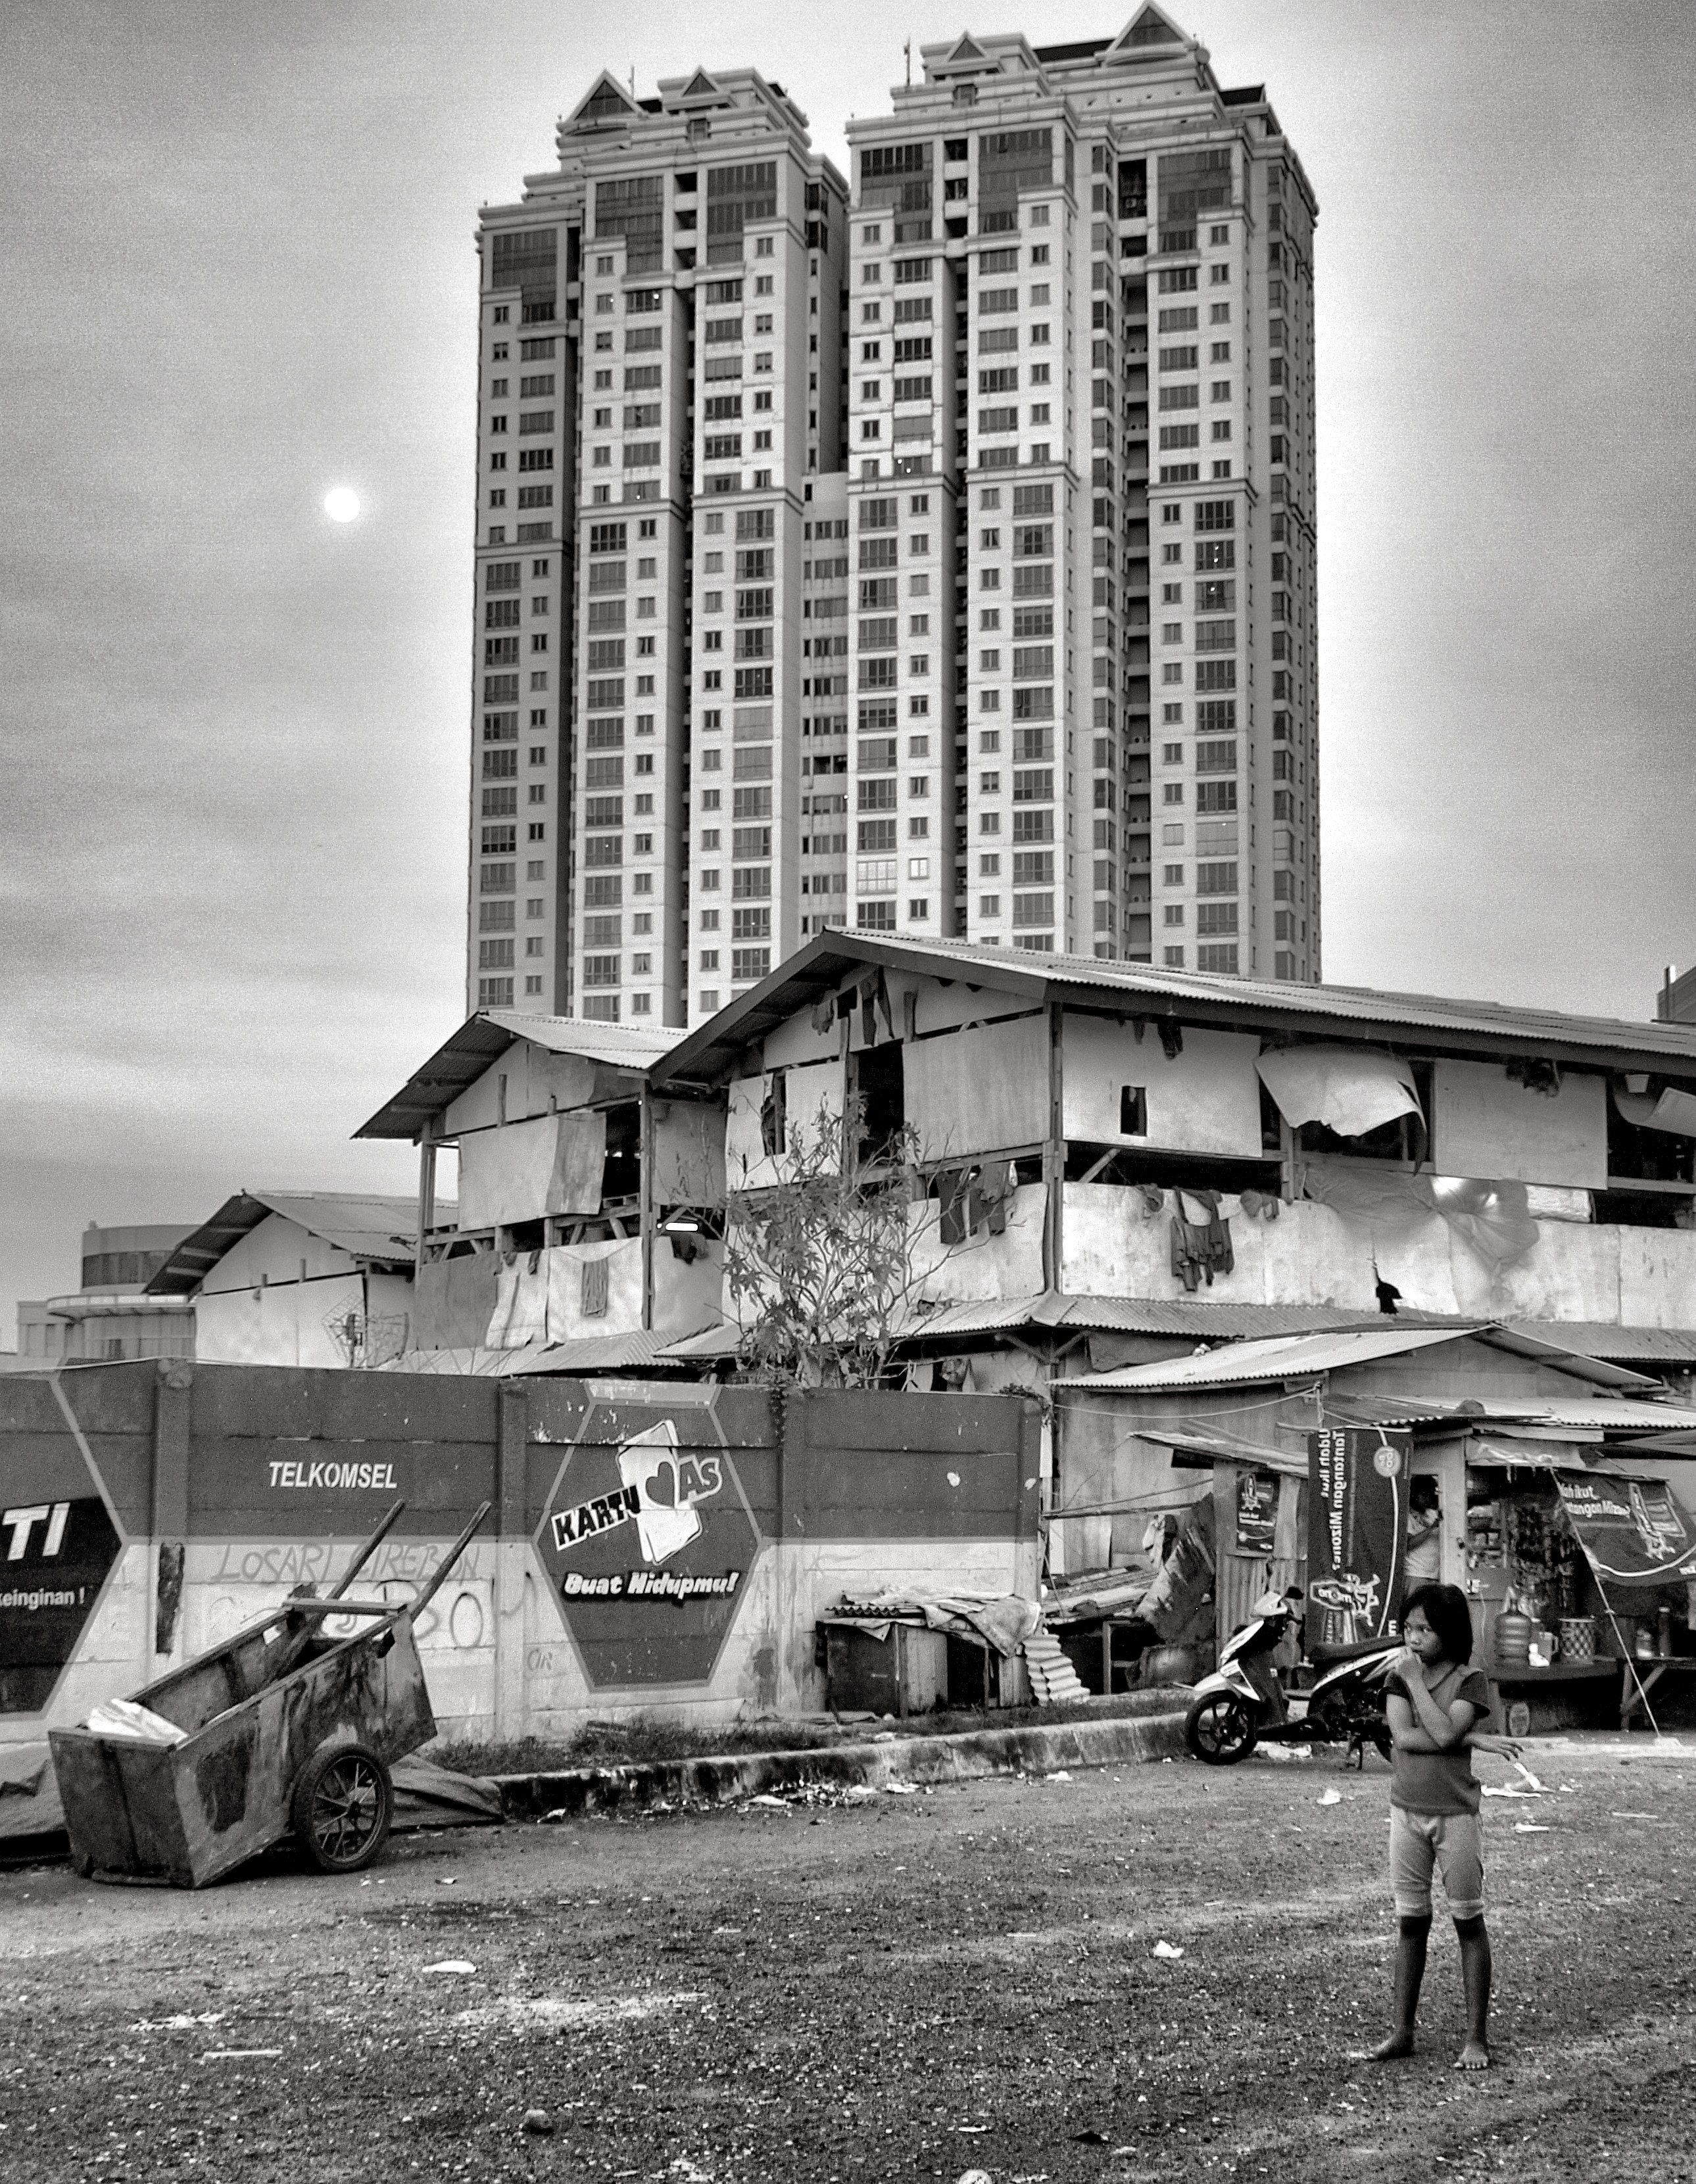 High-rise towers contrasted against low rise slum building